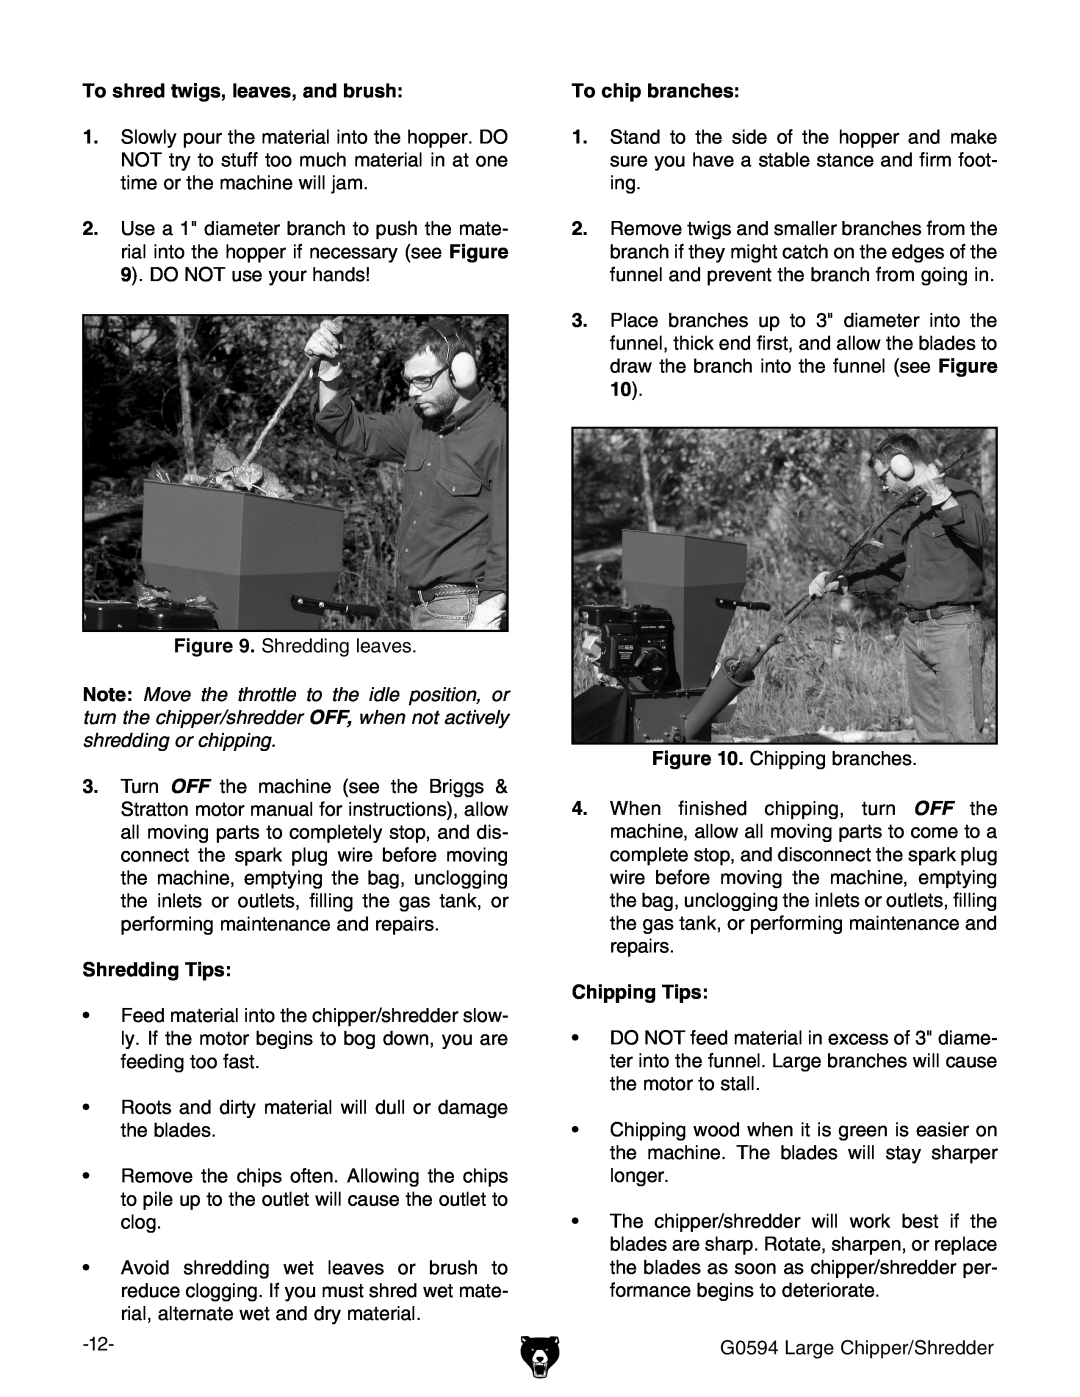 Grizzly G0594 owner manual To shred twigs, leaves, and brush, Shredding Tips, To chip branches, Chipping Tips 